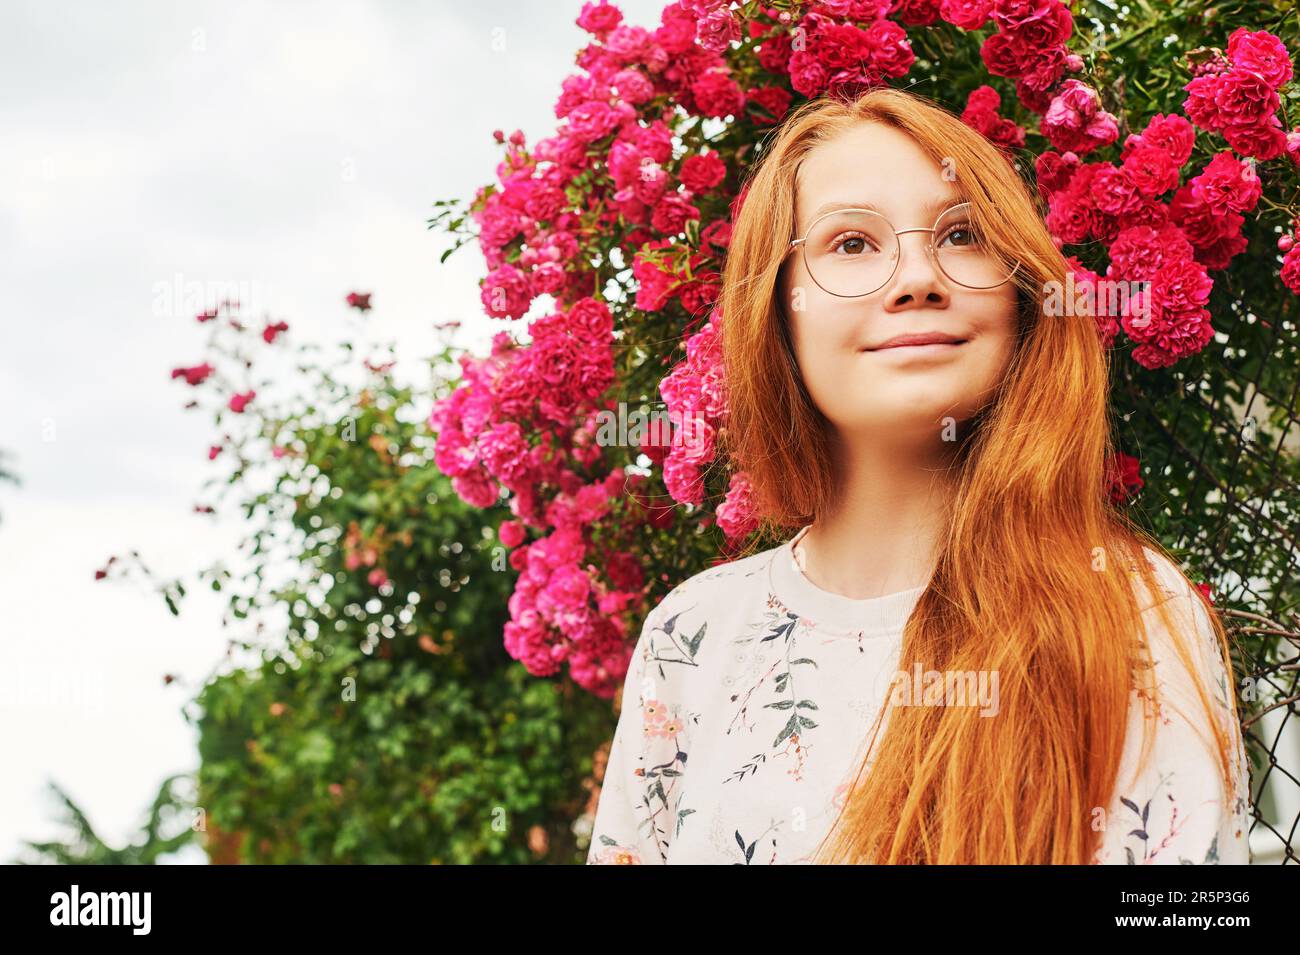 Outdoor close up portrait of happy young girl, wearing eyeglasses, posing in flower garden Stock Photo